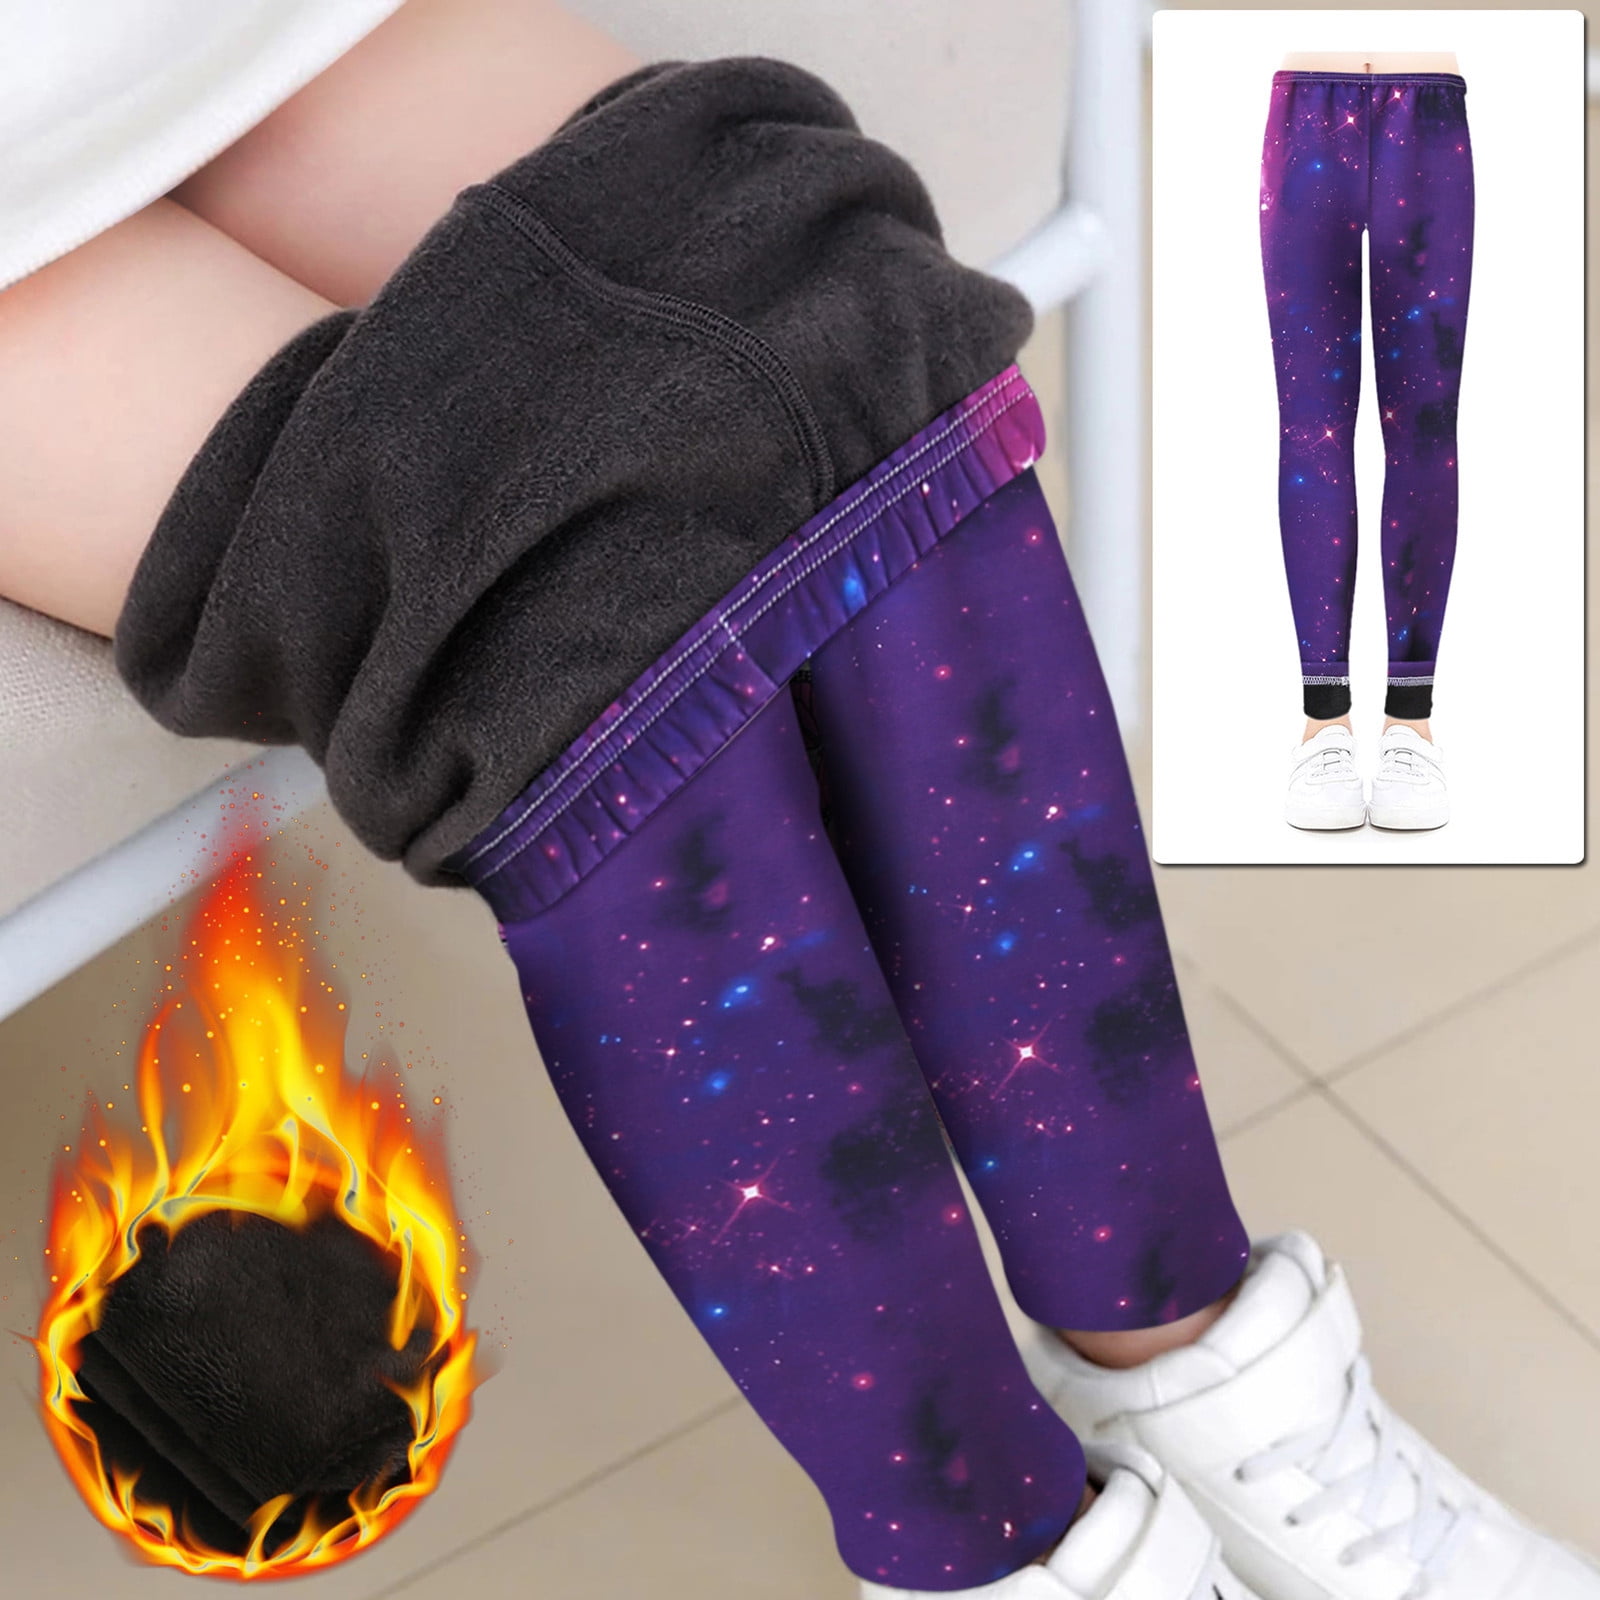 2DXuixsh 12 Girl Clothes Warm Thick Clothing Children Trousers